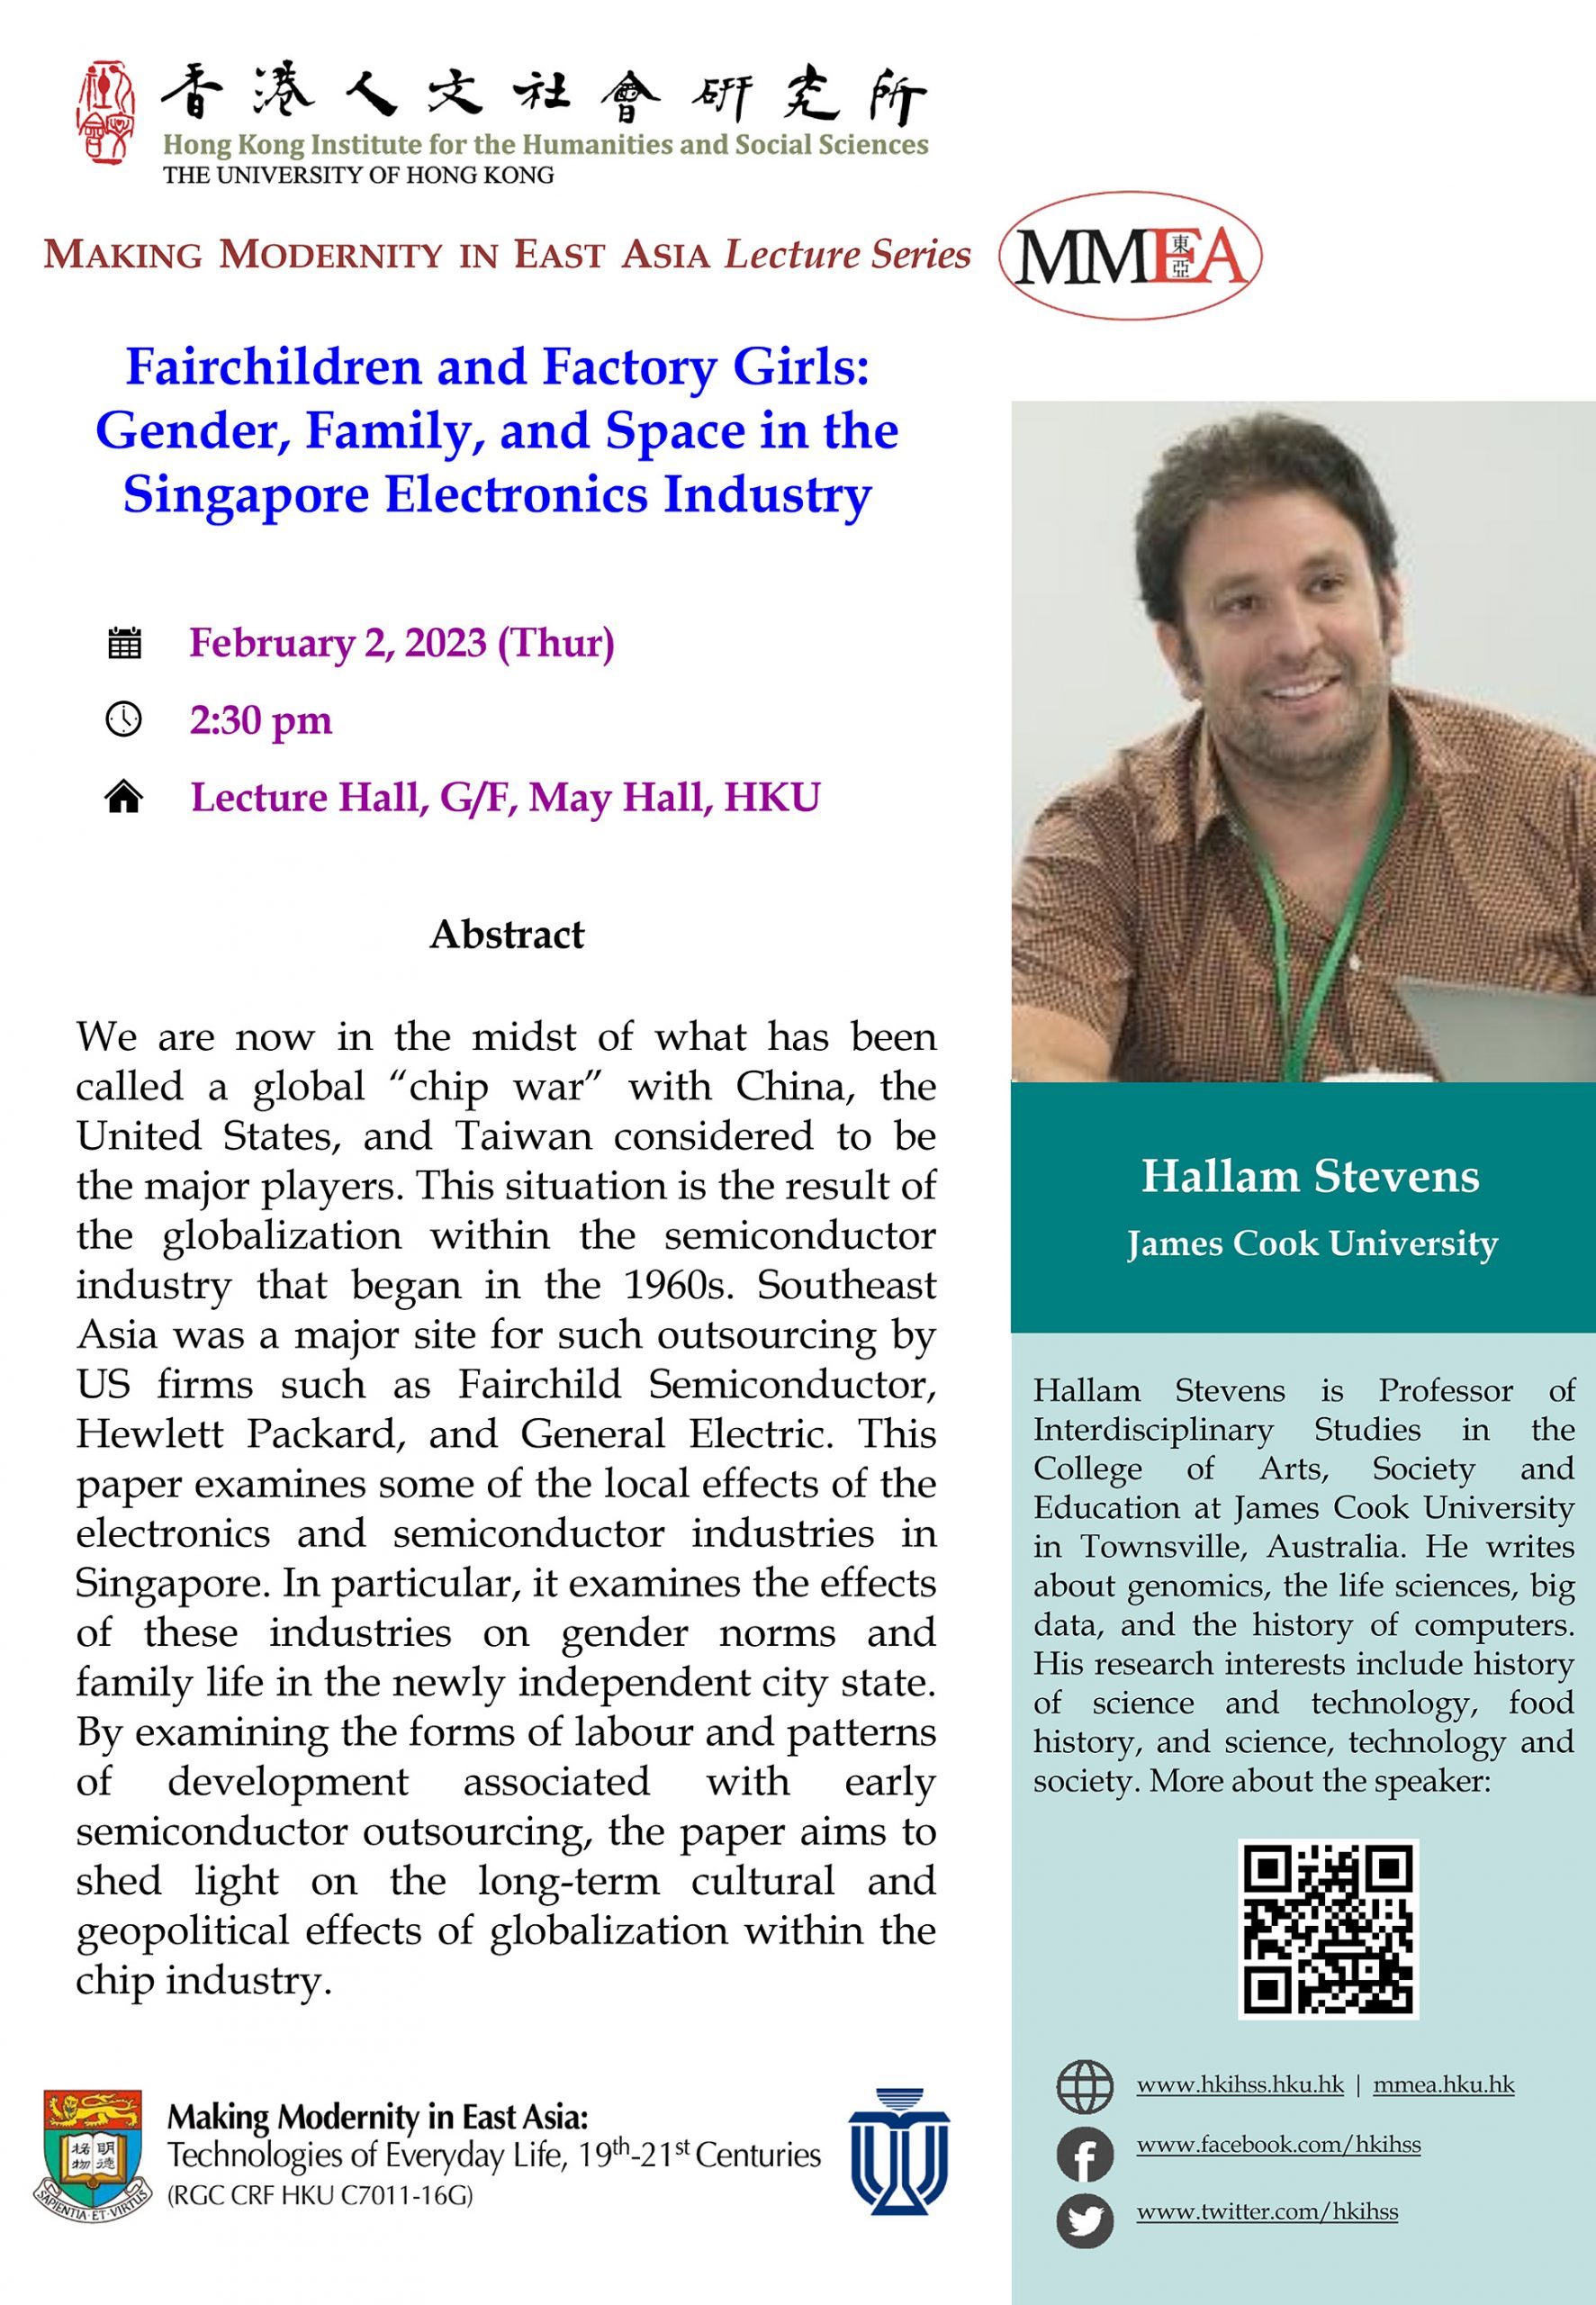 MMEA Lecture Series “Fairchildren and Factory Girls: Gender, Family, and Space in the Singapore Electronics Industry” by Professor Hallam Stevens (February 2, 2023)